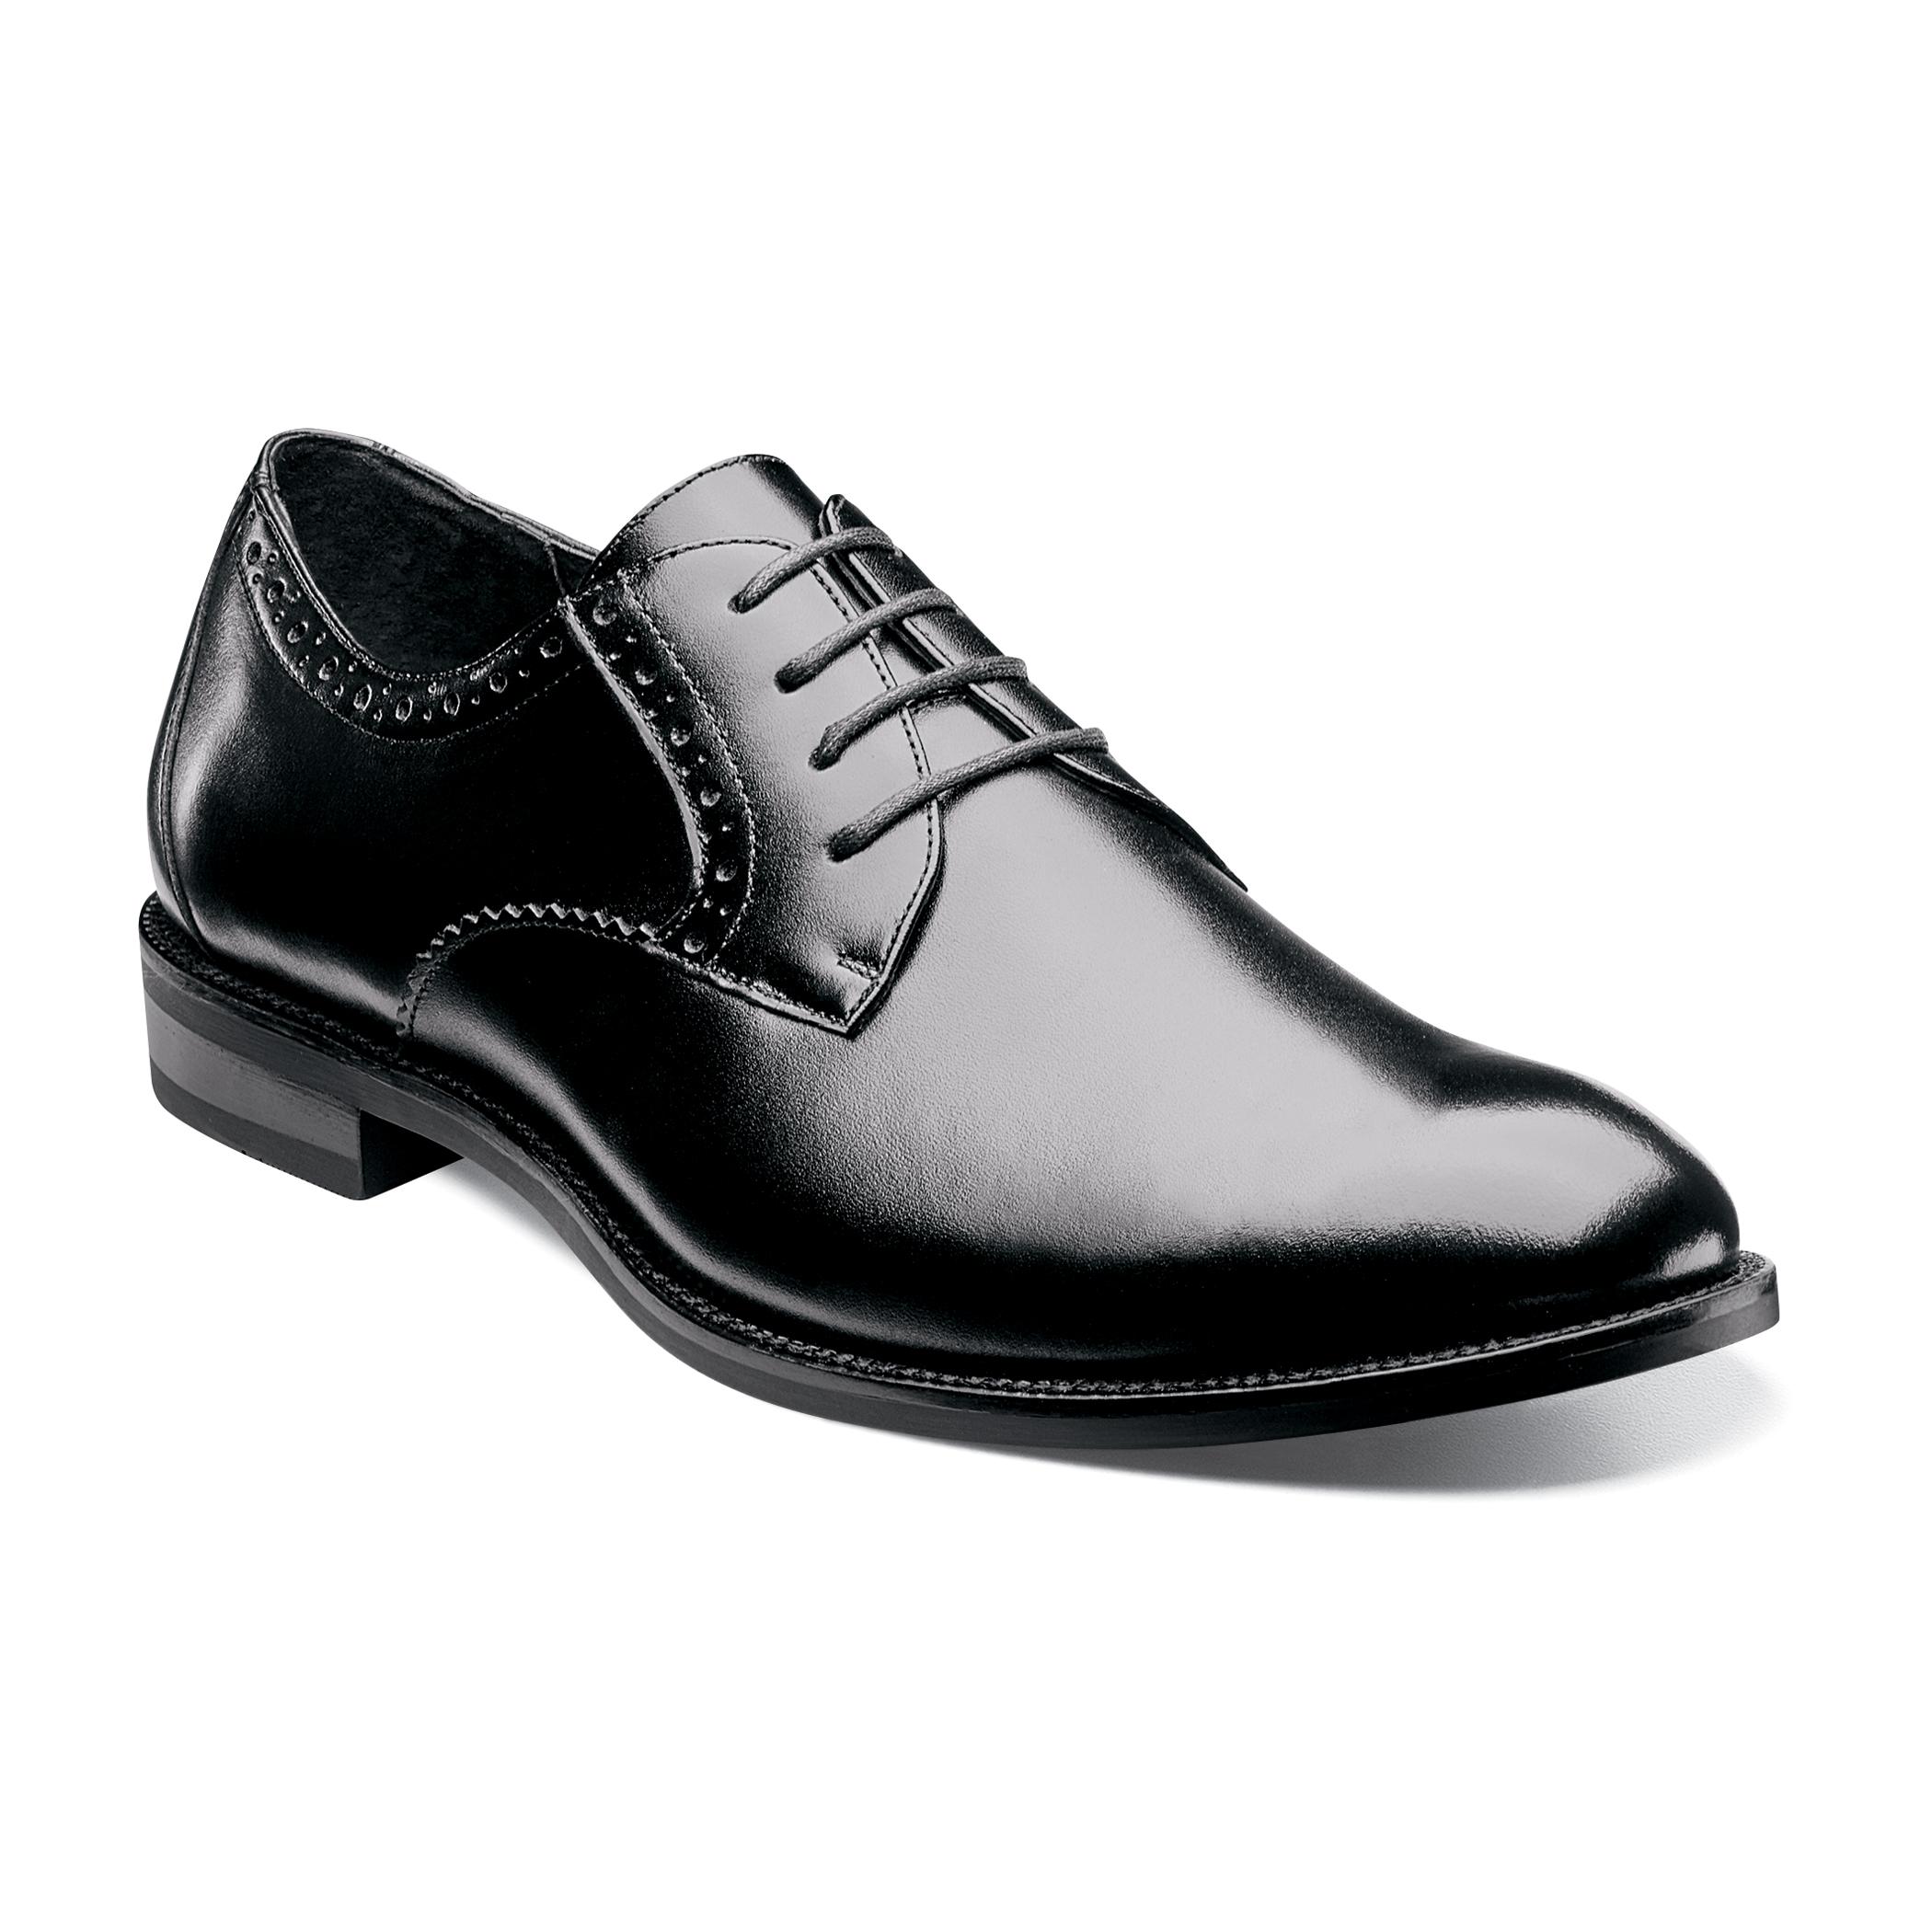 Stacy Adams Graham Black Genuine Leather Shoes 24956 - $89.90 ...